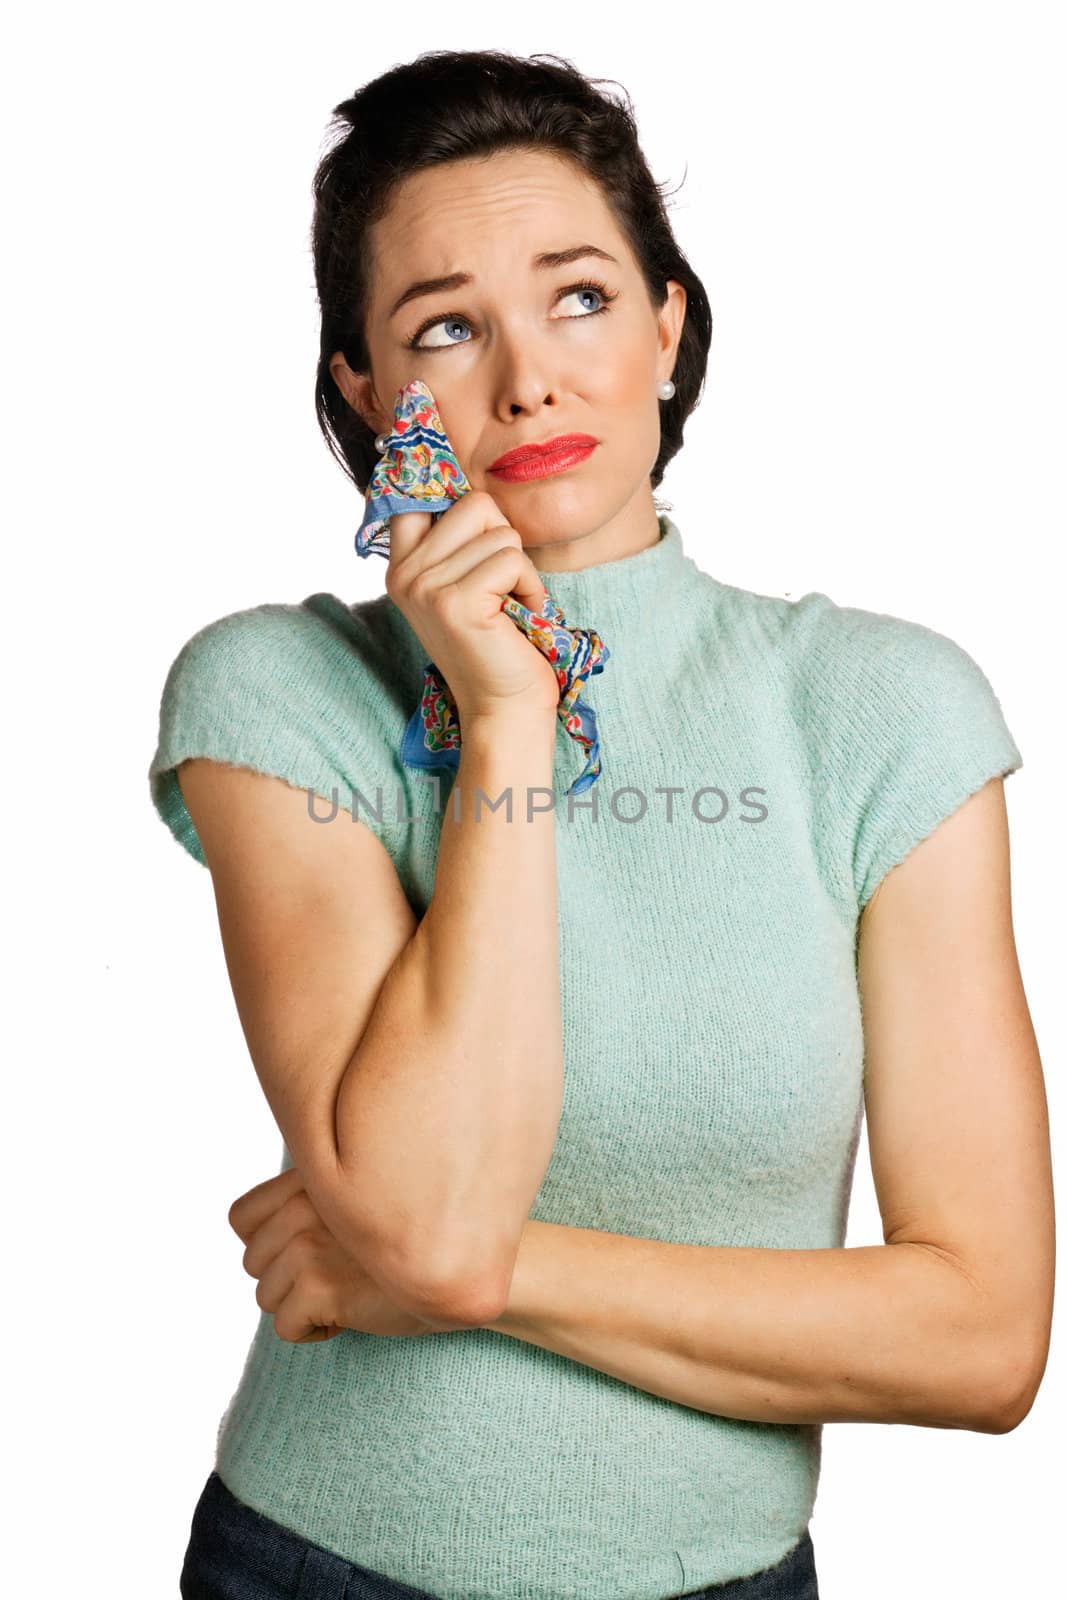 Beautiful young woman wiping tears with handkerchief. 1950's look isolated over white.